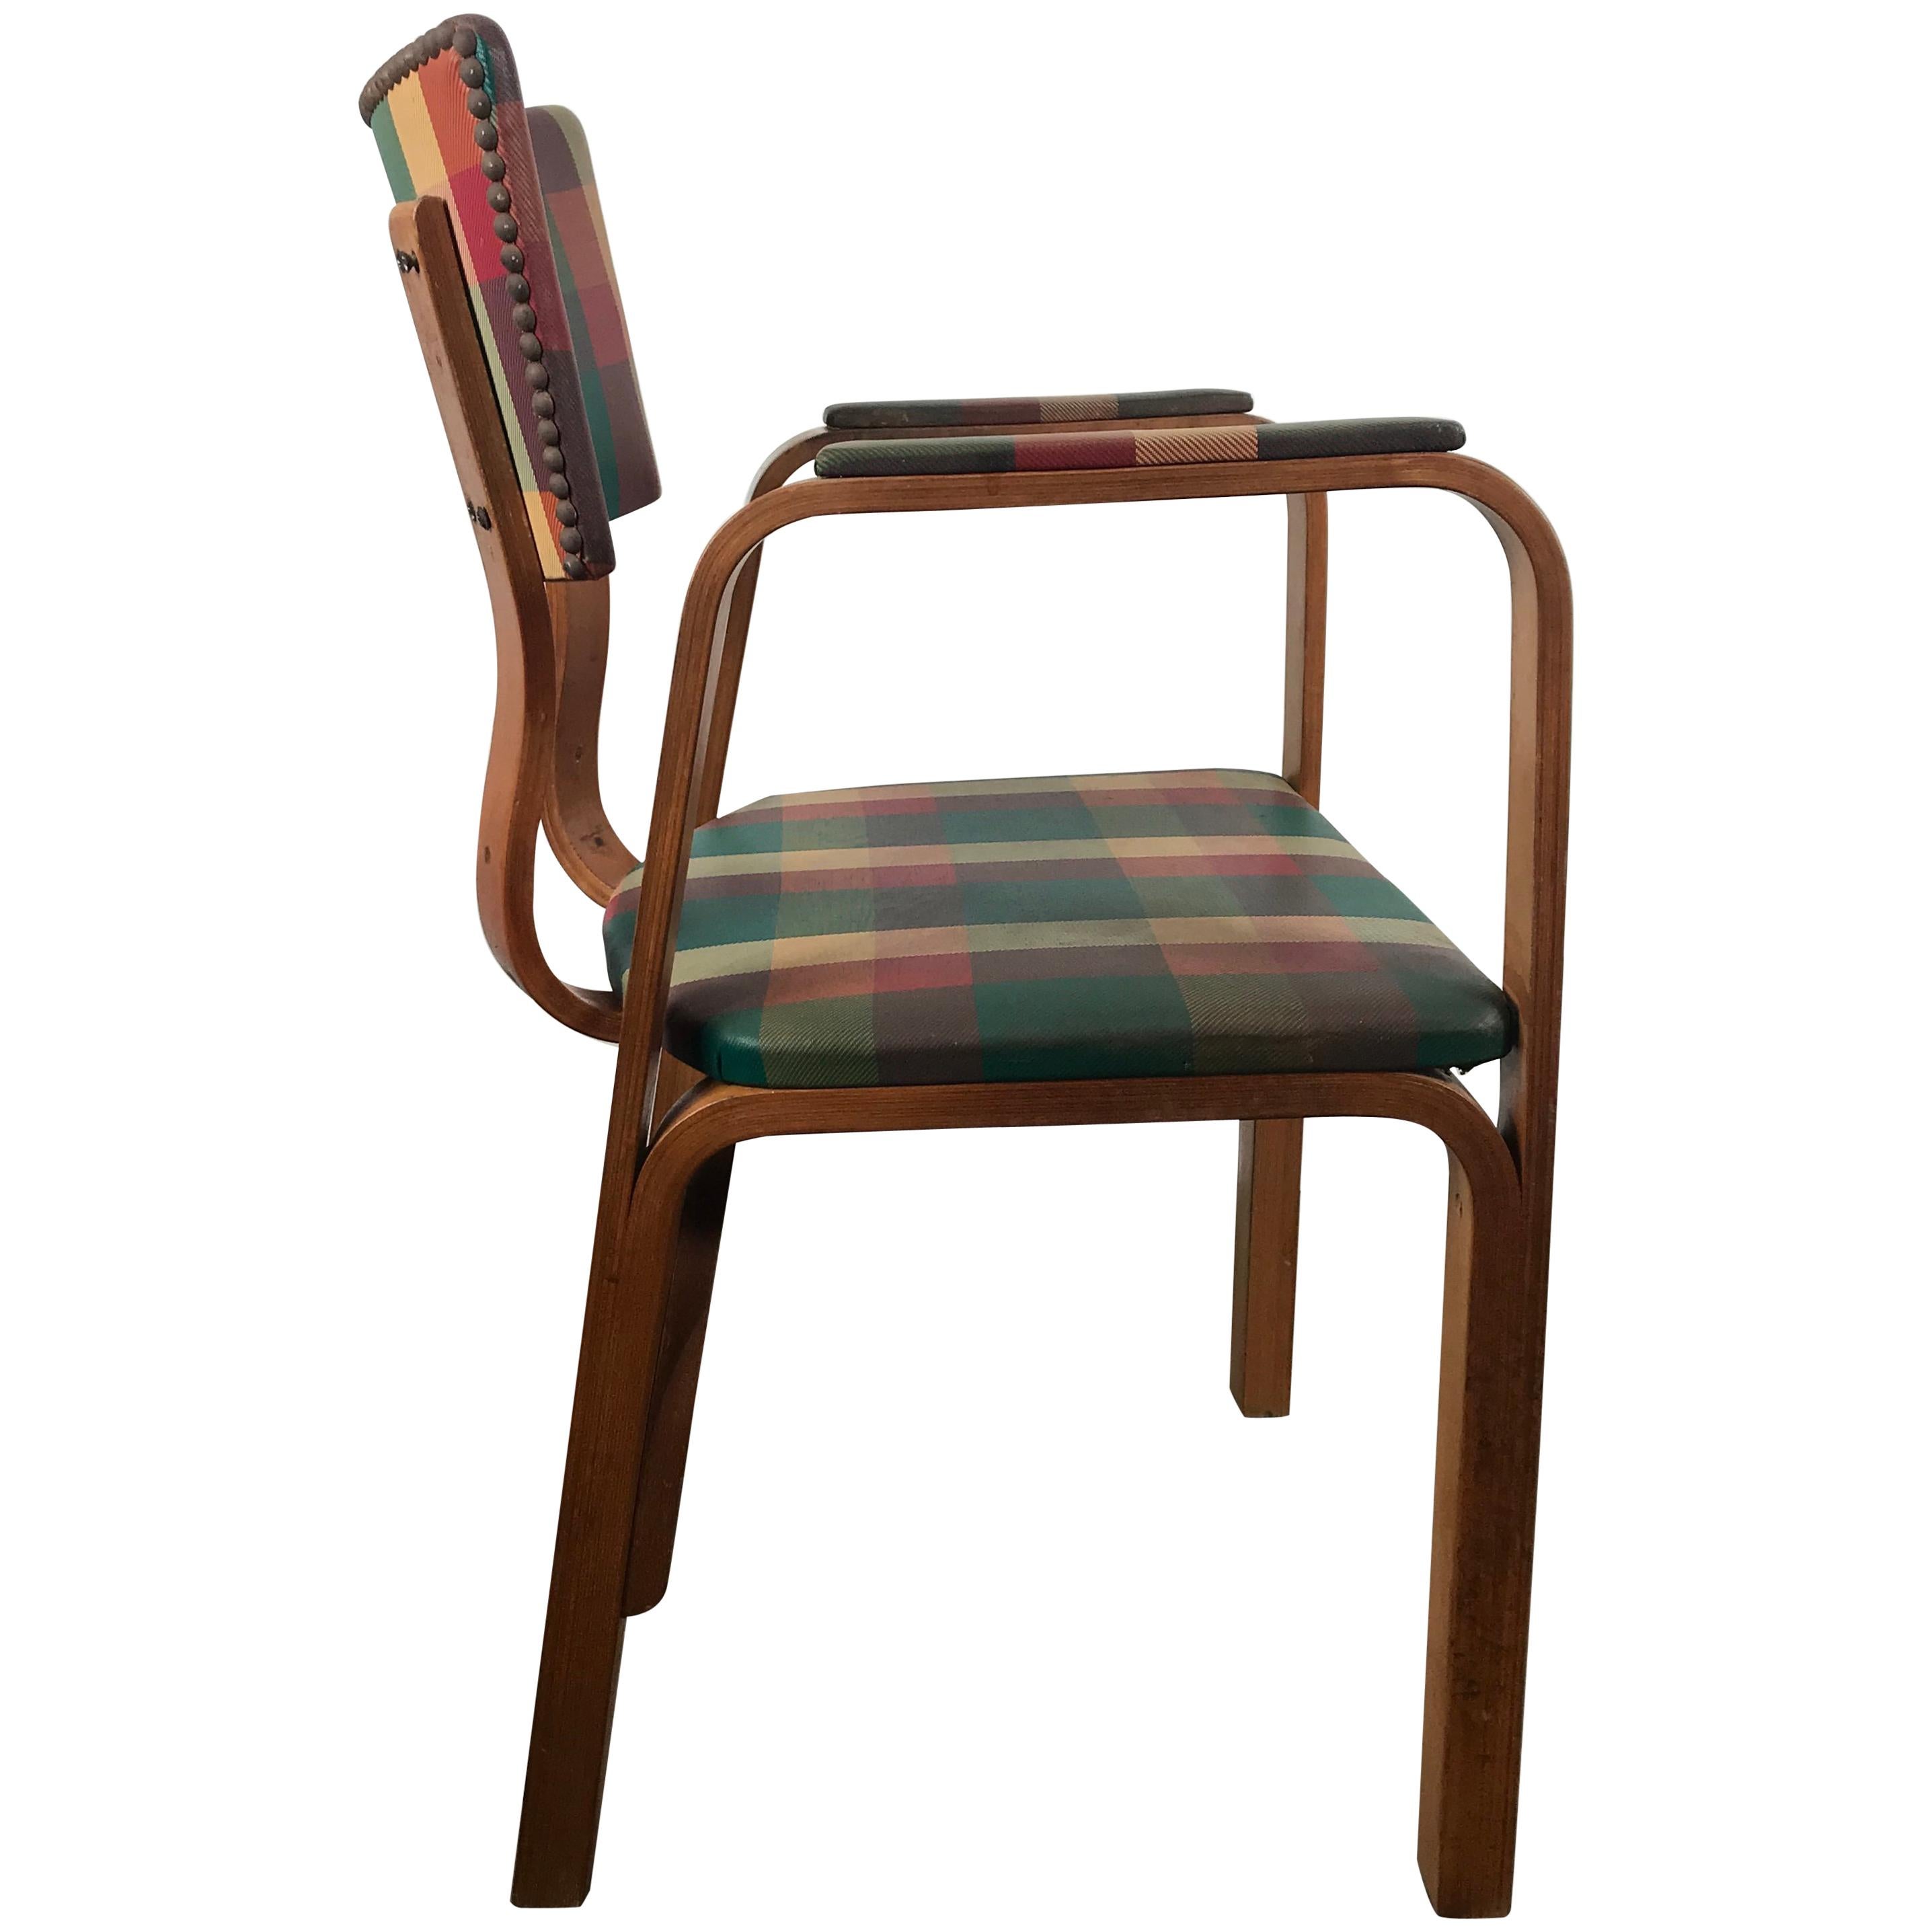 Classic Bentwood Armchair with Original Plaid Oil Cloth by Thonet Brothers 1940